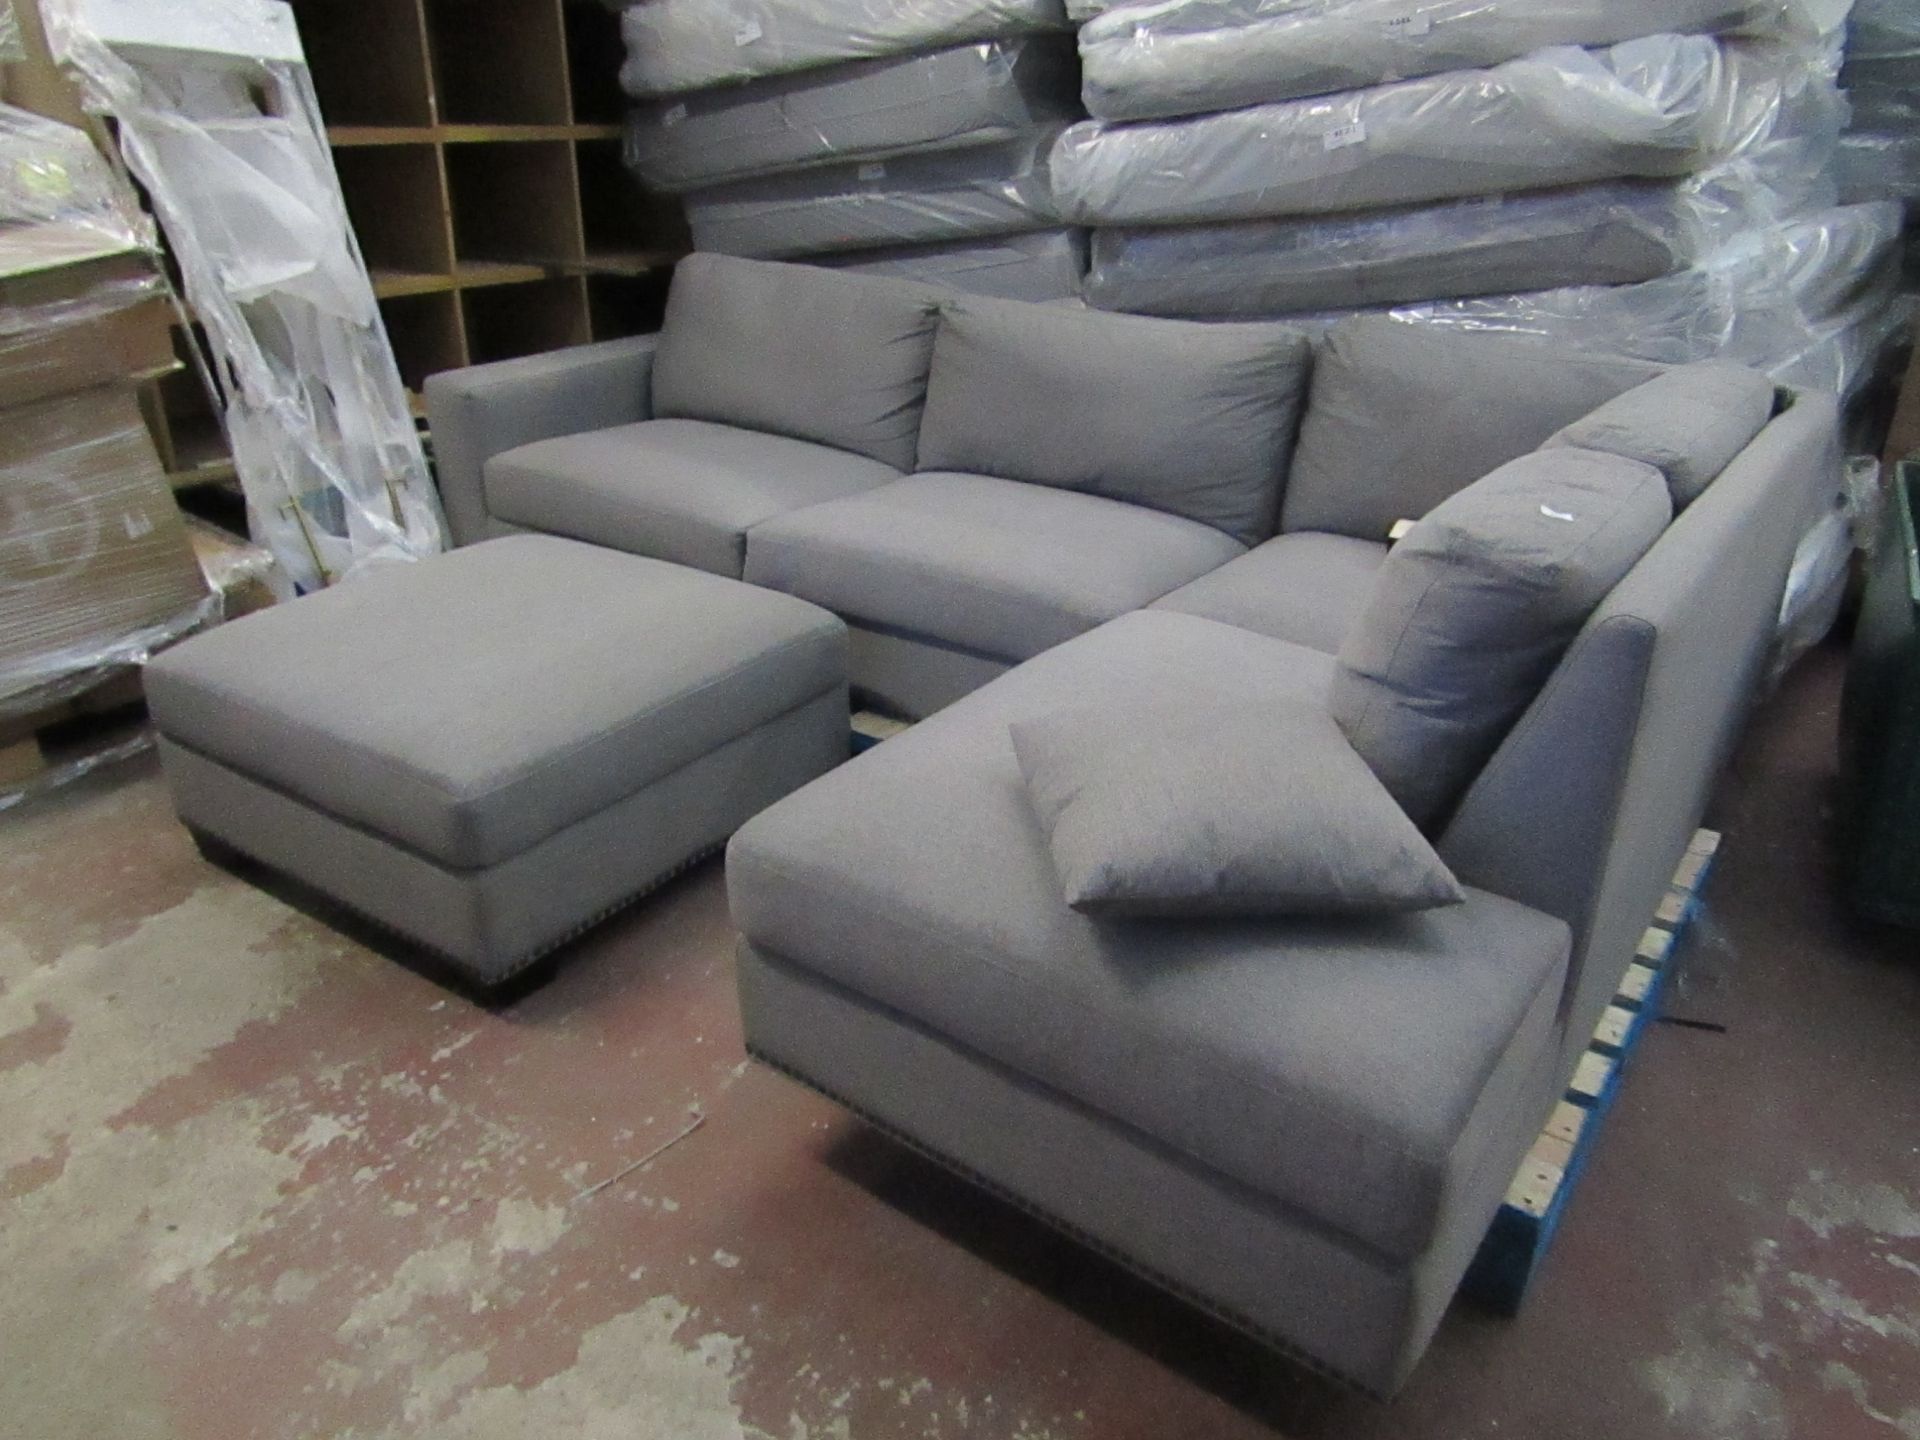 Costco Grey 3 piece corner sofa, complete with feet, looks in good condtion just a coupole of